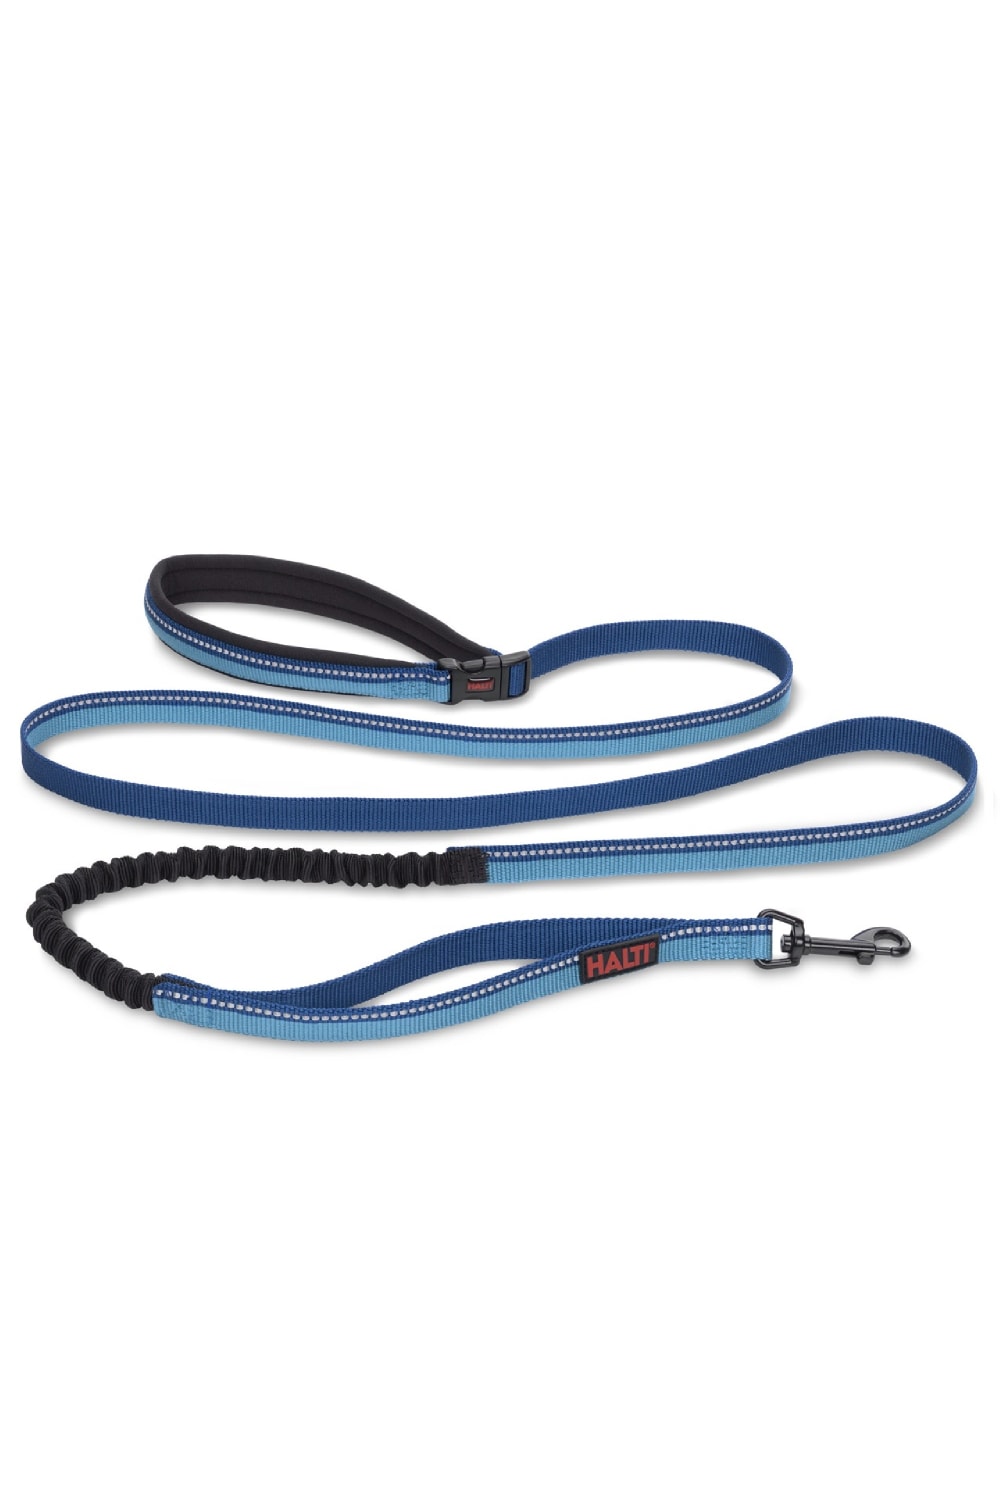 HALTI All-In-One Lead (Blue) (Large)